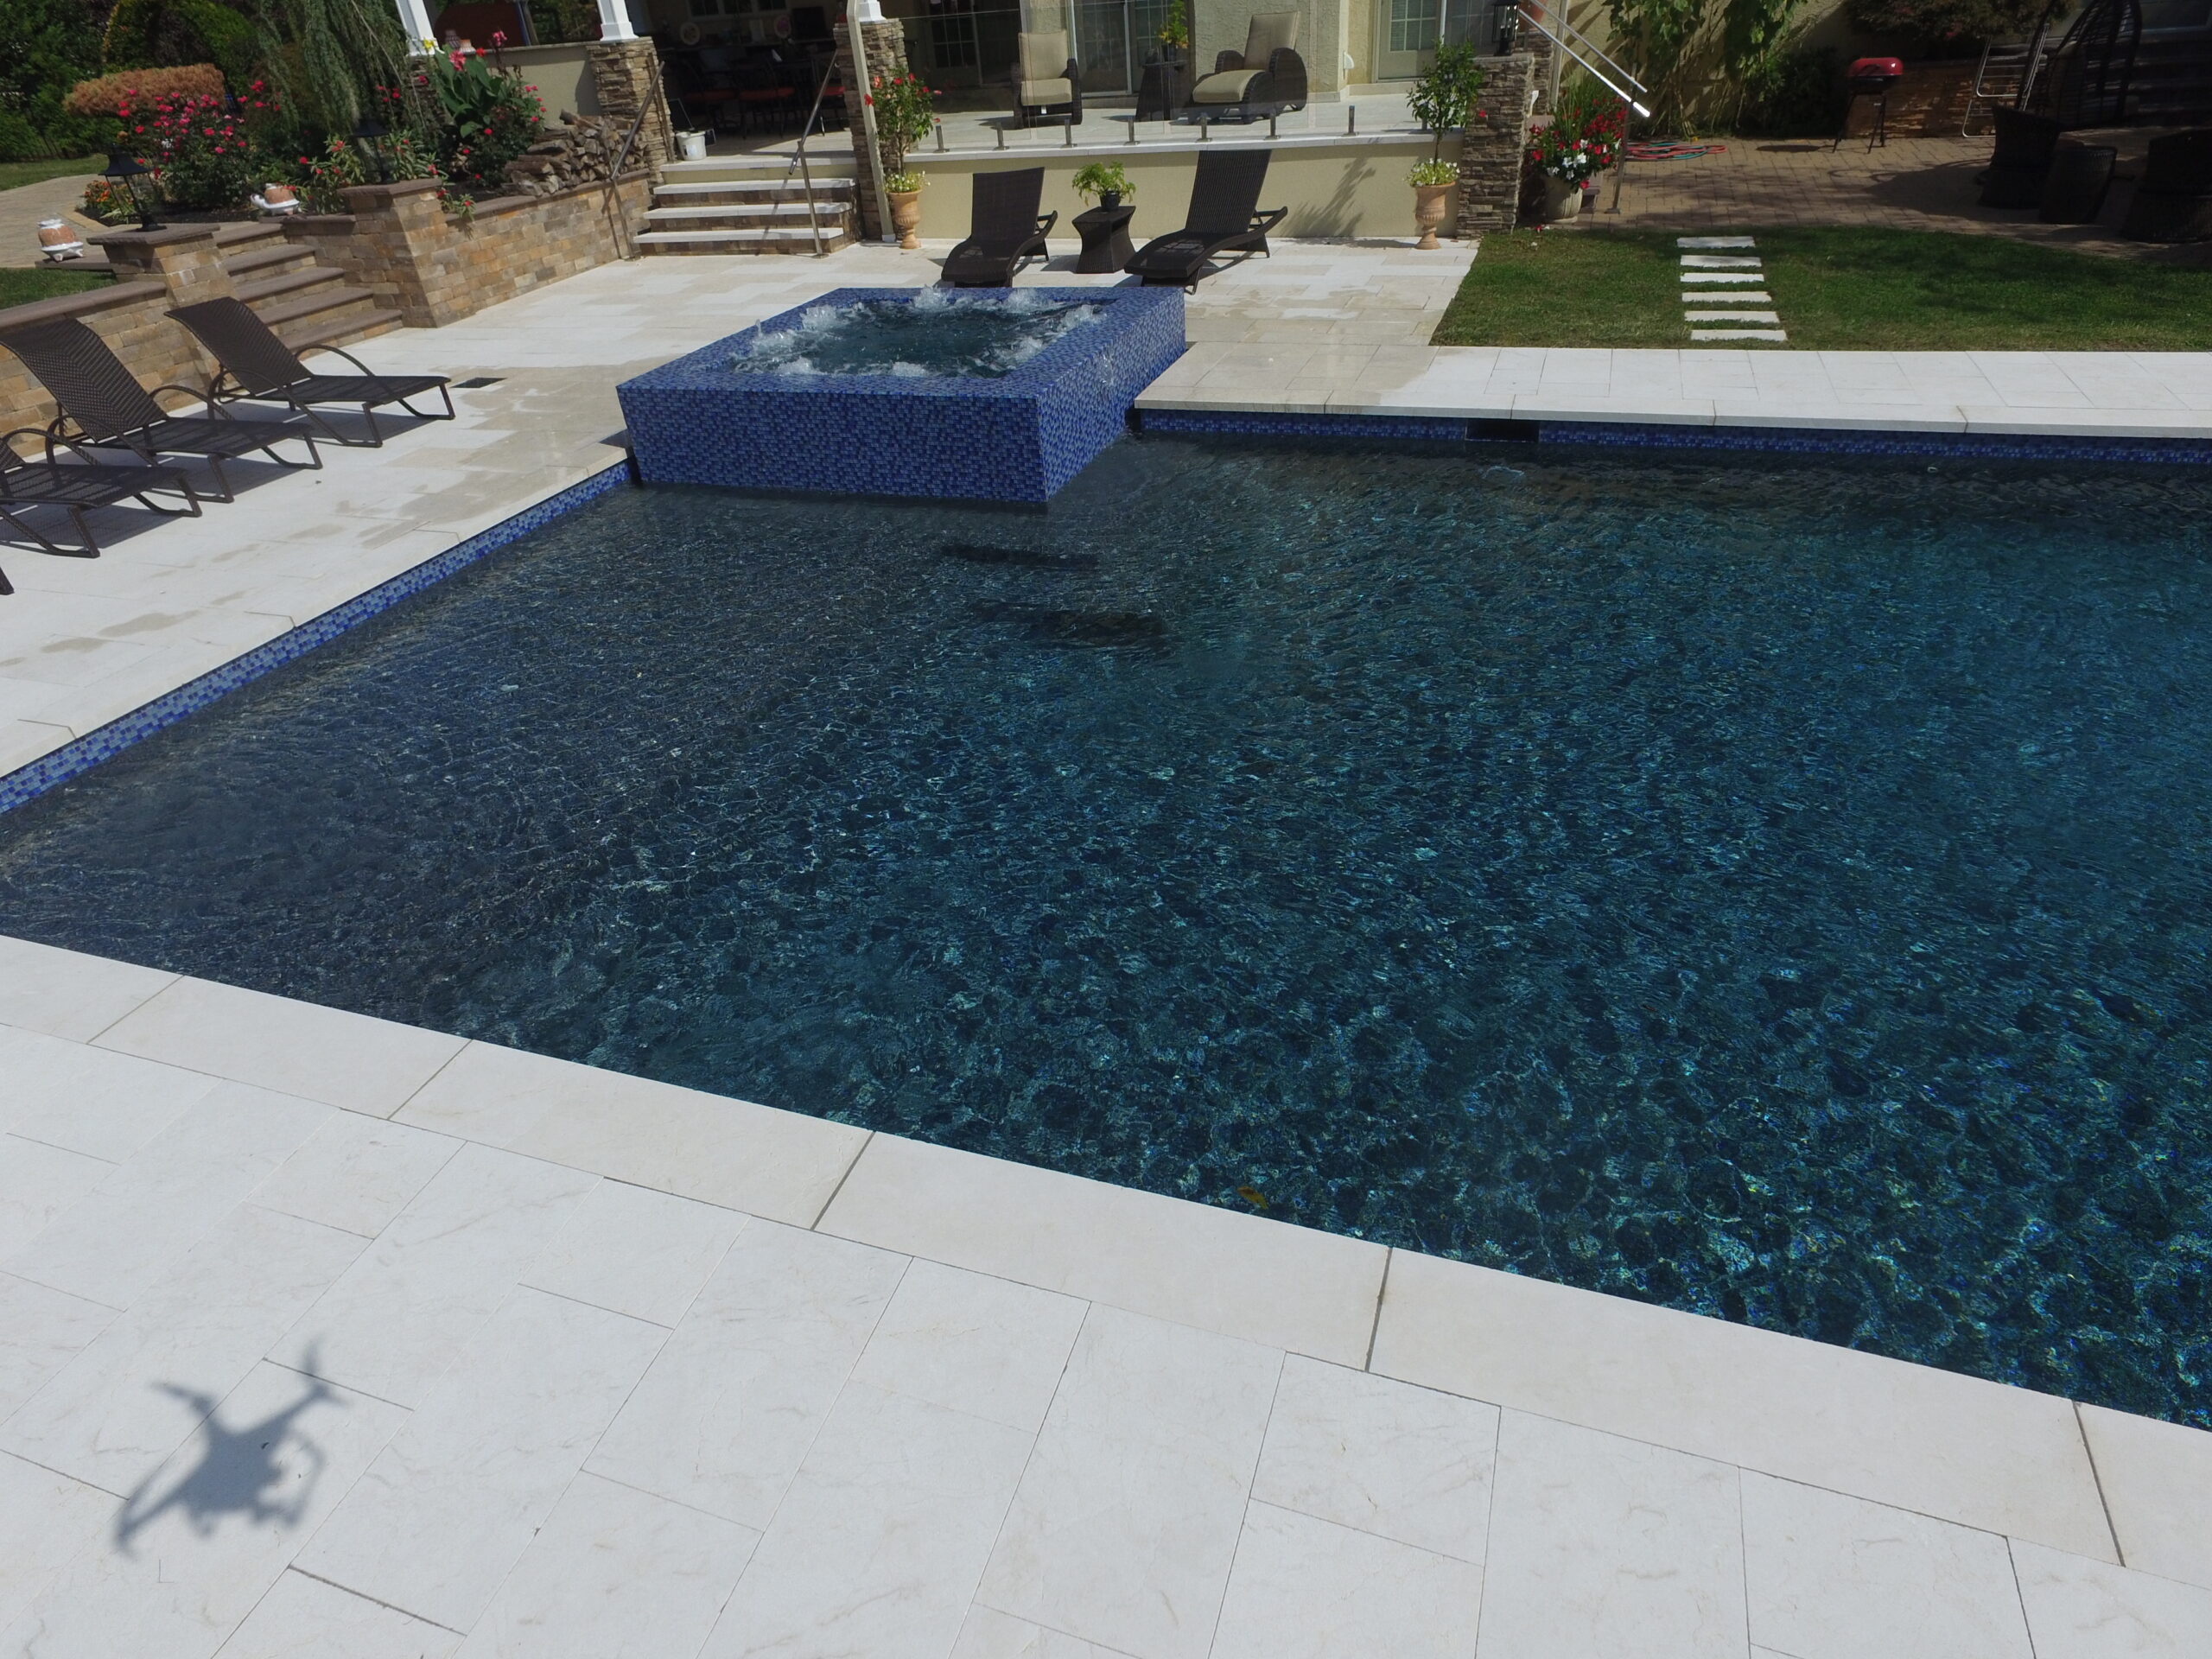 Steps to Safely Reopen Your Pool When Winter Ends